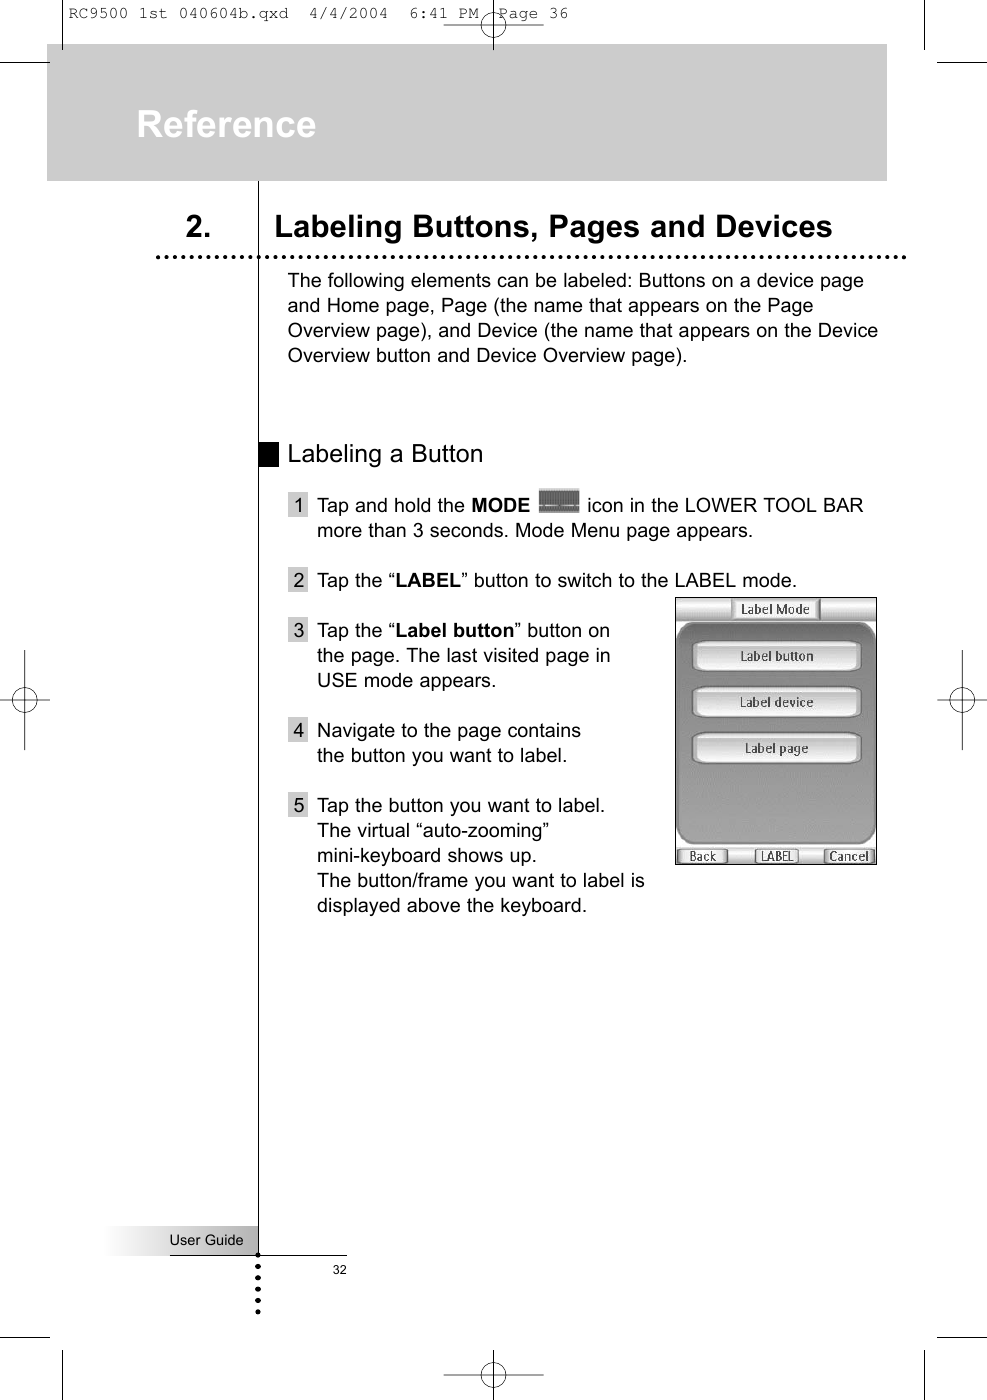 User Guide32The following elements can be labeled: Buttons on a device pageand Home page, Page (the name that appears on the PageOverview page), and Device (the name that appears on the DeviceOverview button and Device Overview page).Labeling a Button1 Tap and hold the MODE icon in the LOWER TOOL BARmore than 3 seconds. Mode Menu page appears.2 Tap the “LABEL” button to switch to the LABEL mode.3 Tap the “Label button” button on the page. The last visited page in USE mode appears.4 Navigate to the page contains the button you want to label.5 Tap the button you want to label. The virtual “auto-zooming” mini-keyboard shows up.The button/frame you want to label is displayed above the keyboard.Reference2. Labeling Buttons, Pages and DevicesRC9500 1st 040604b.qxd  4/4/2004  6:41 PM  Page 36